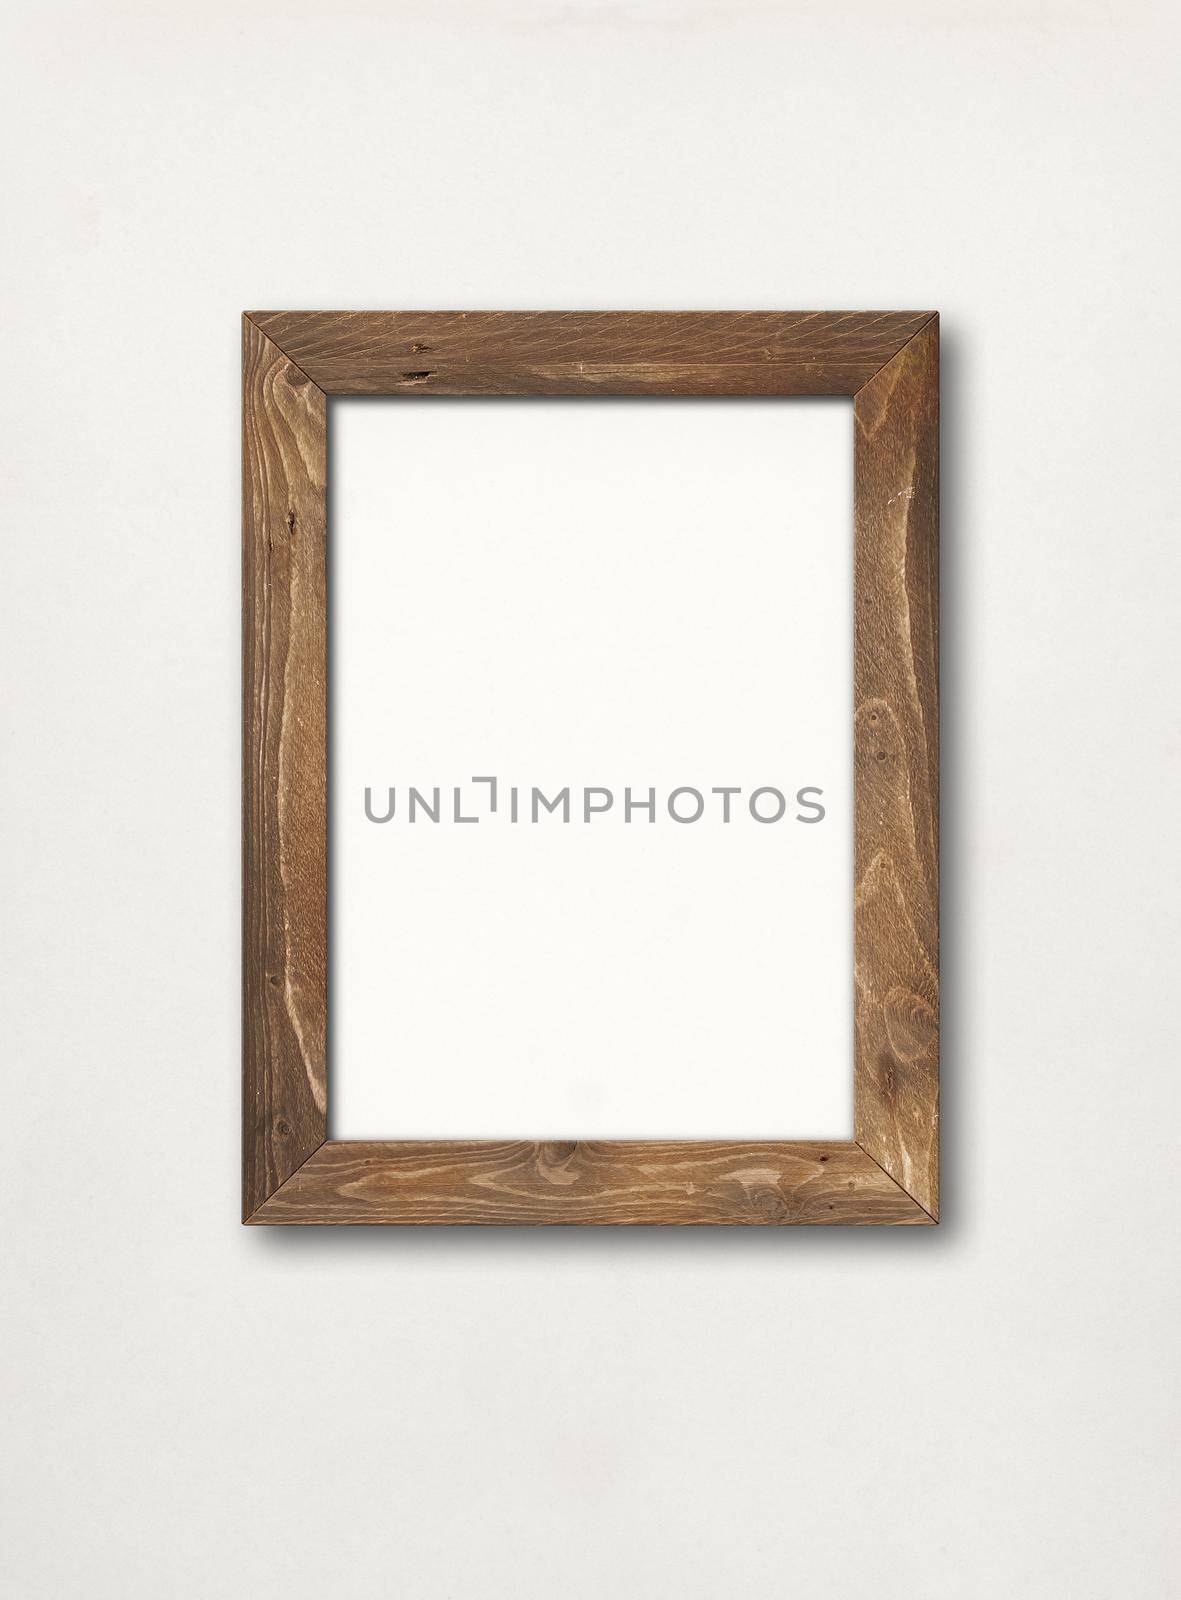 Old rustic wooden picture frame hanging on a white wall by daboost